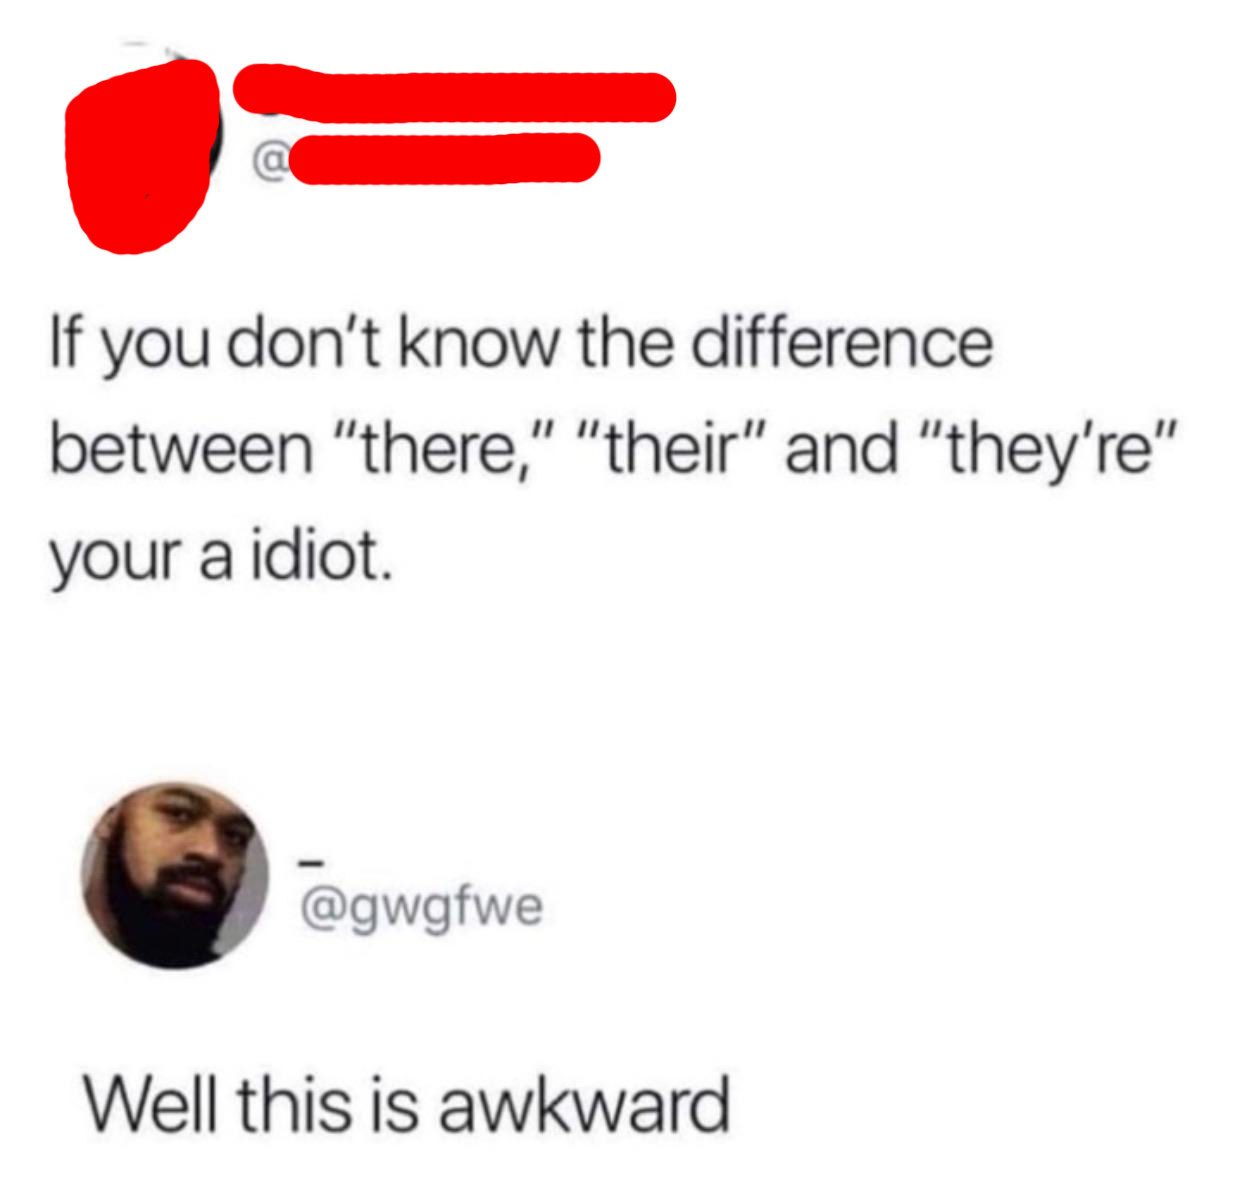 tweet reading If you don&#x27;t know the difference between &quot;there&quot;, &quot;their&quot; and &#x27;&quot;they&#x27;re&quot;, then your an idiot.
